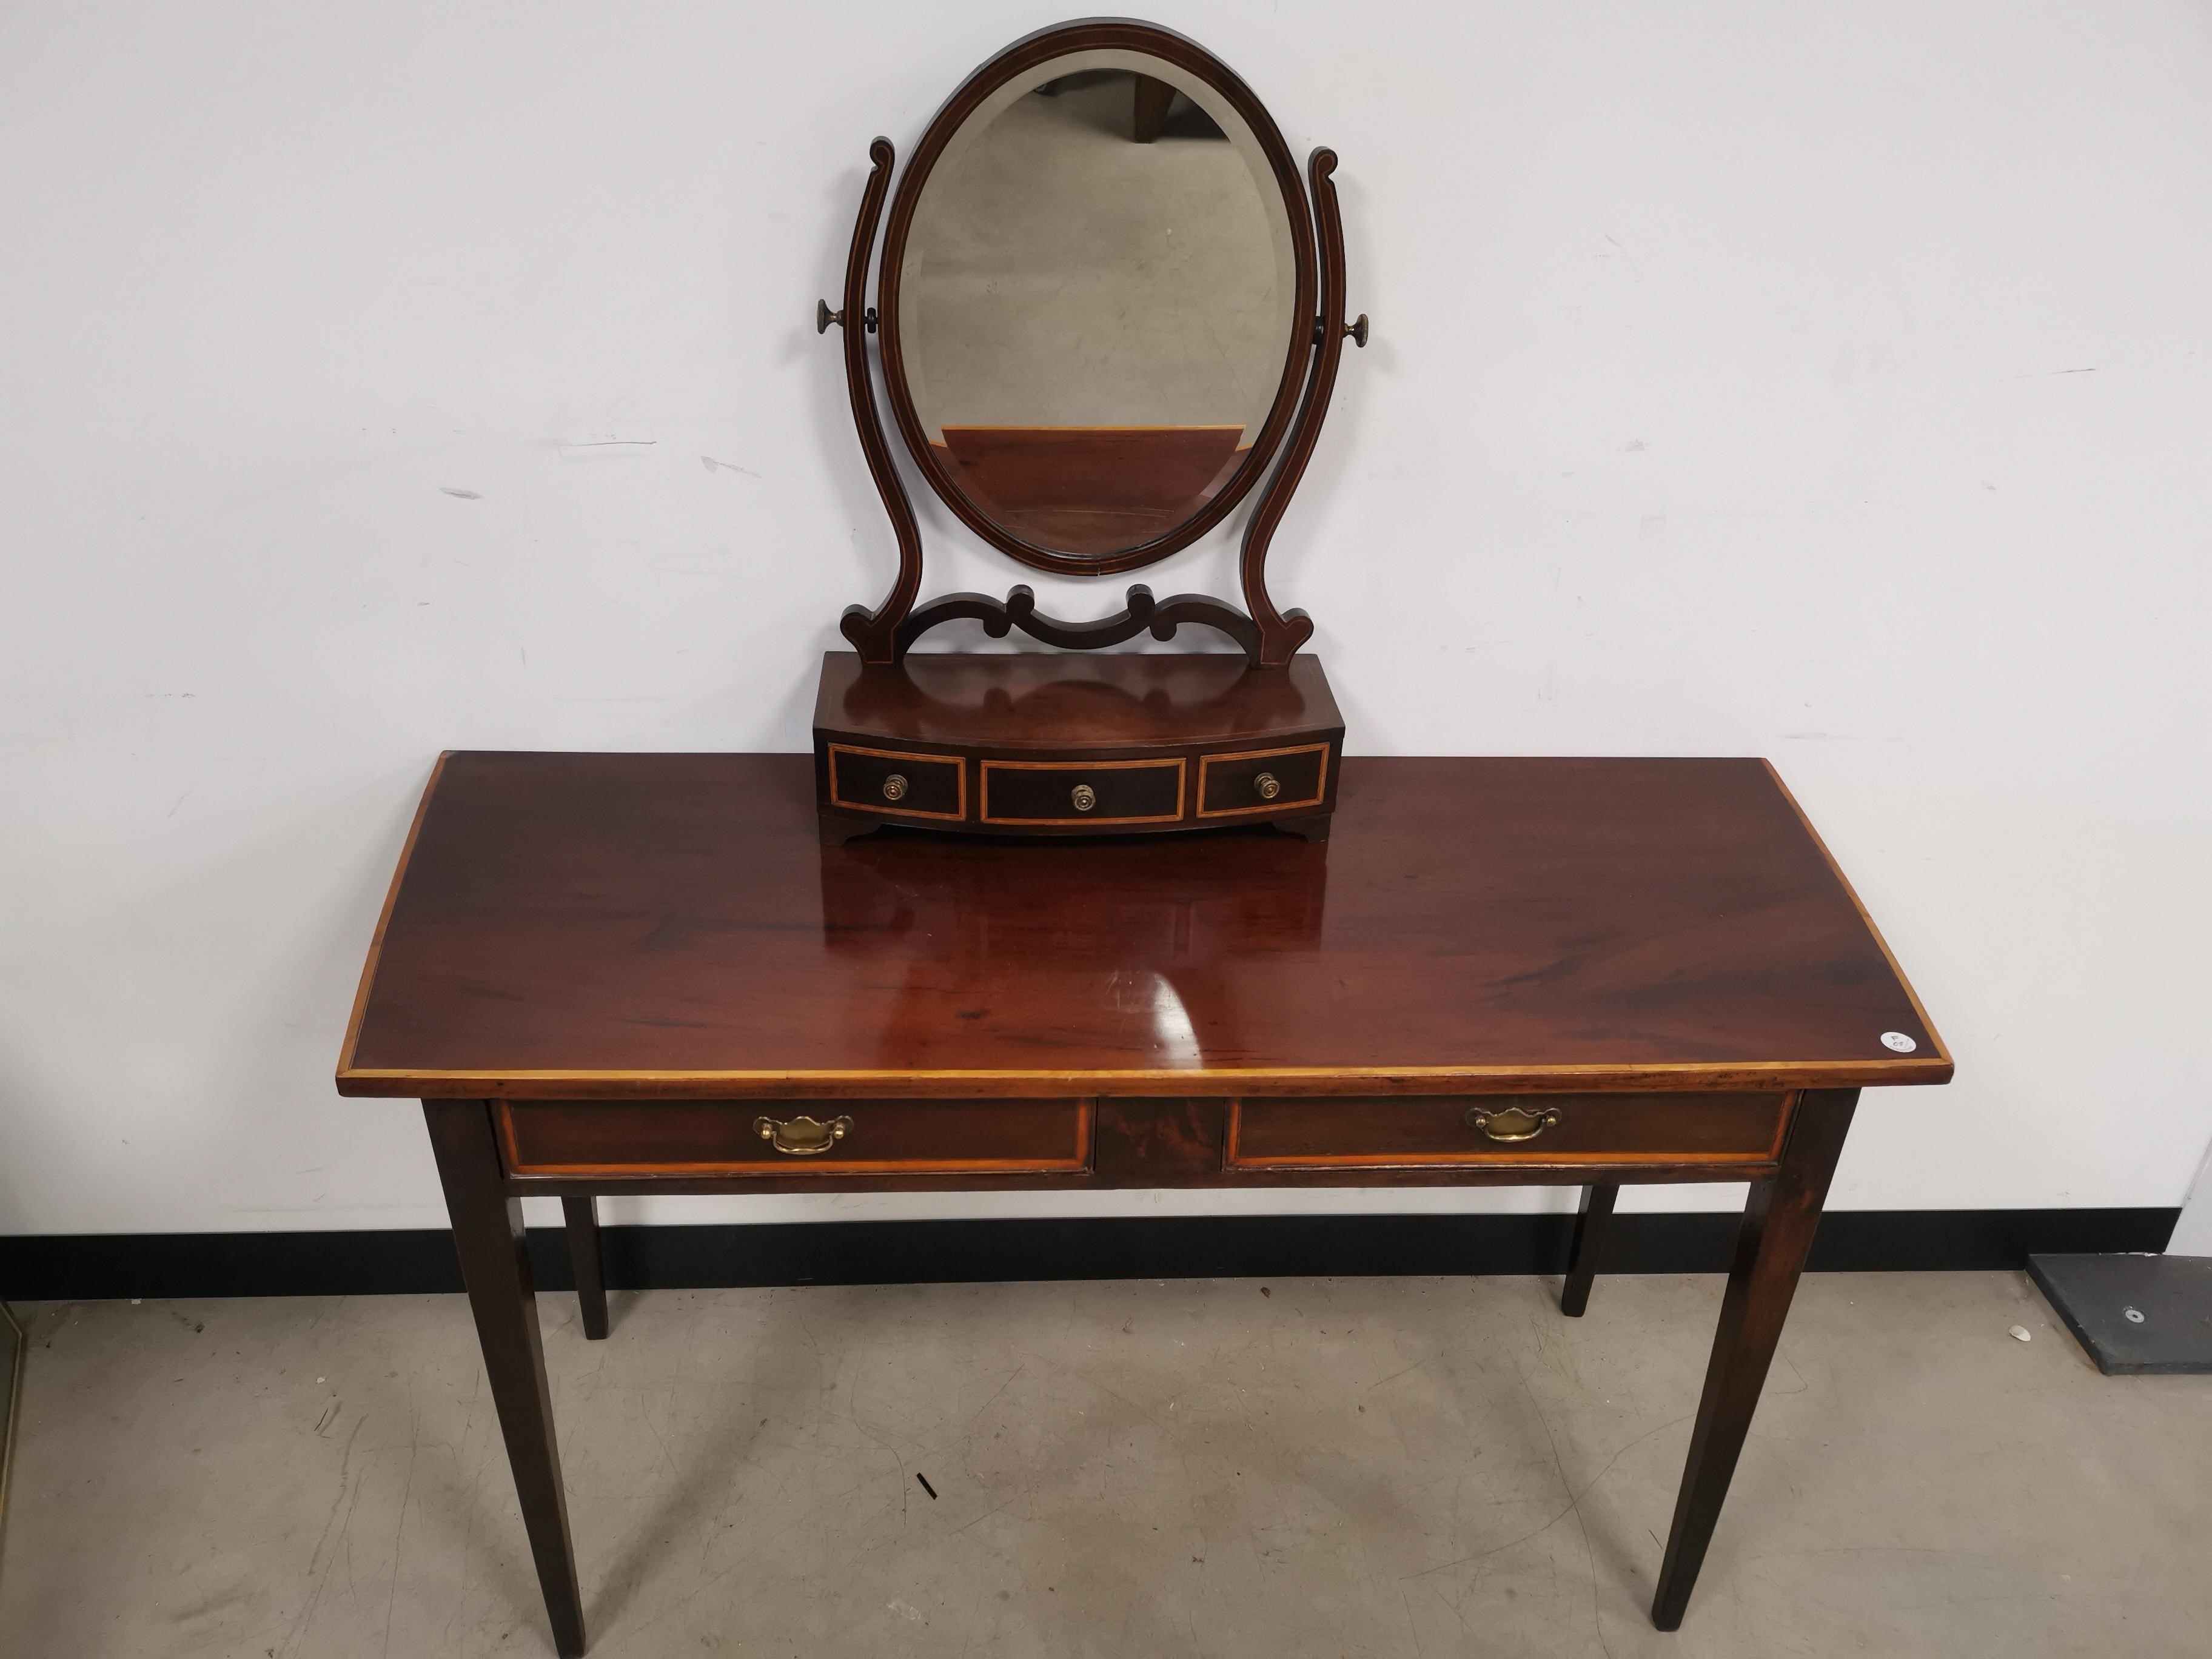 Edwardian two drawer side table, with inlay detailing. Together with a table top vanity mirror.